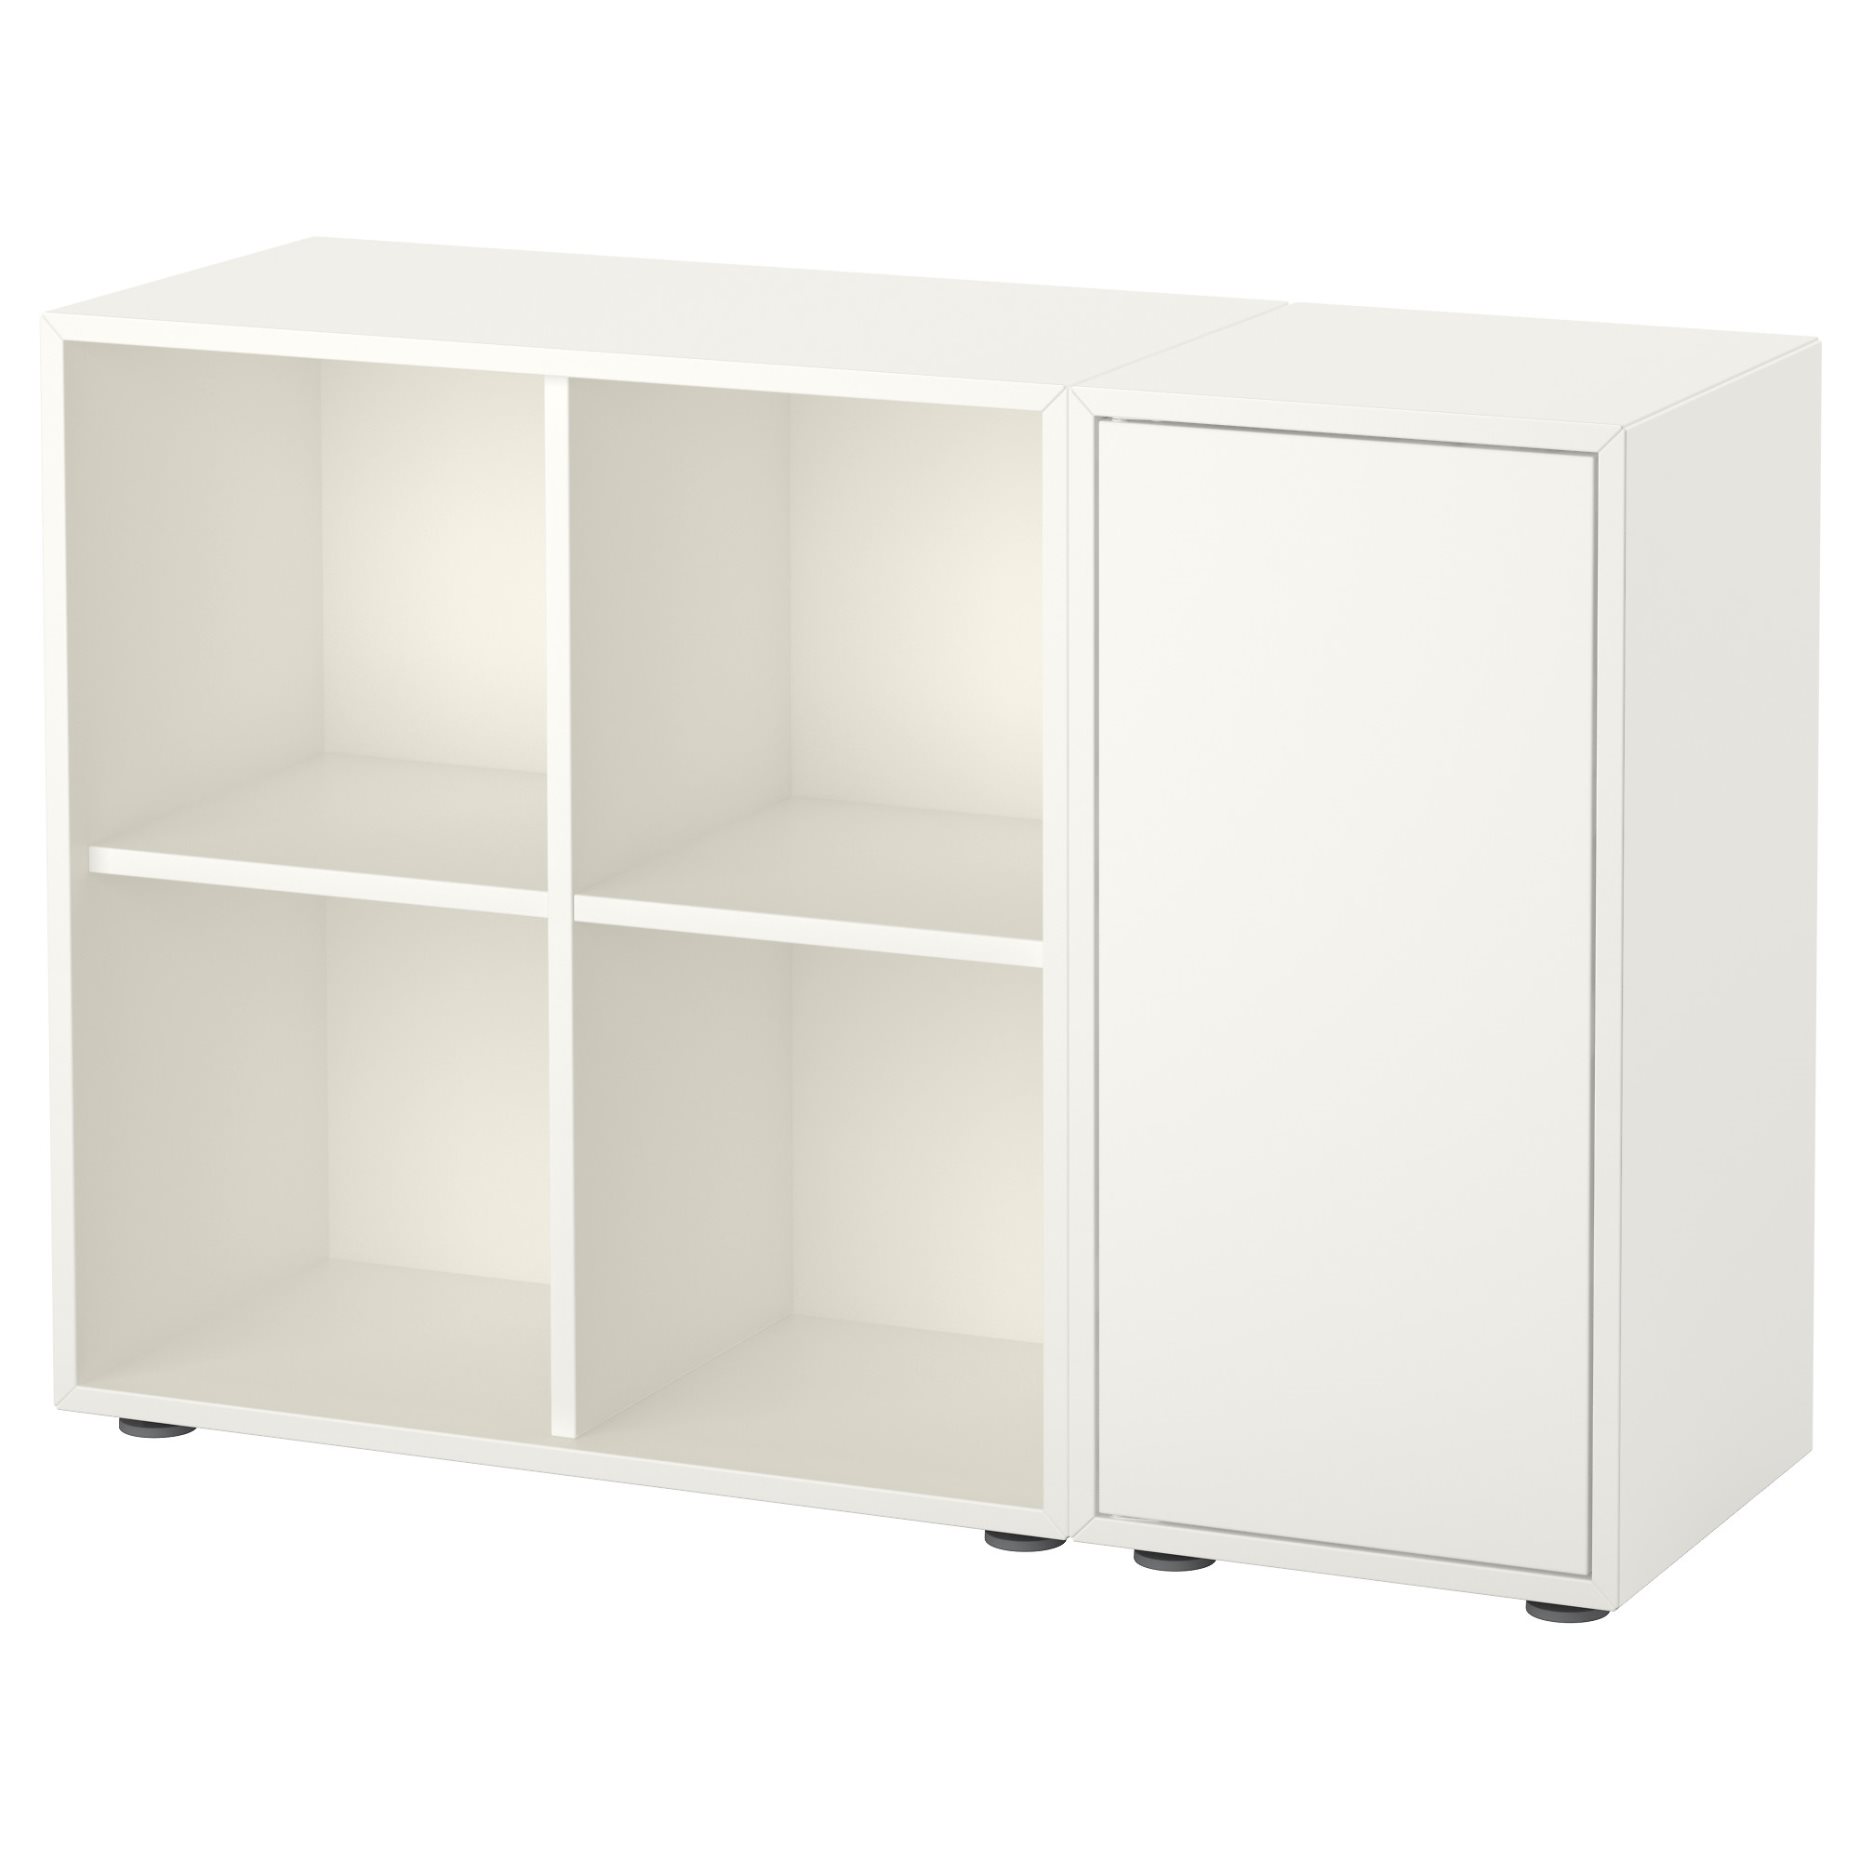 EKET, cabinet combination with feet, 491.892.03